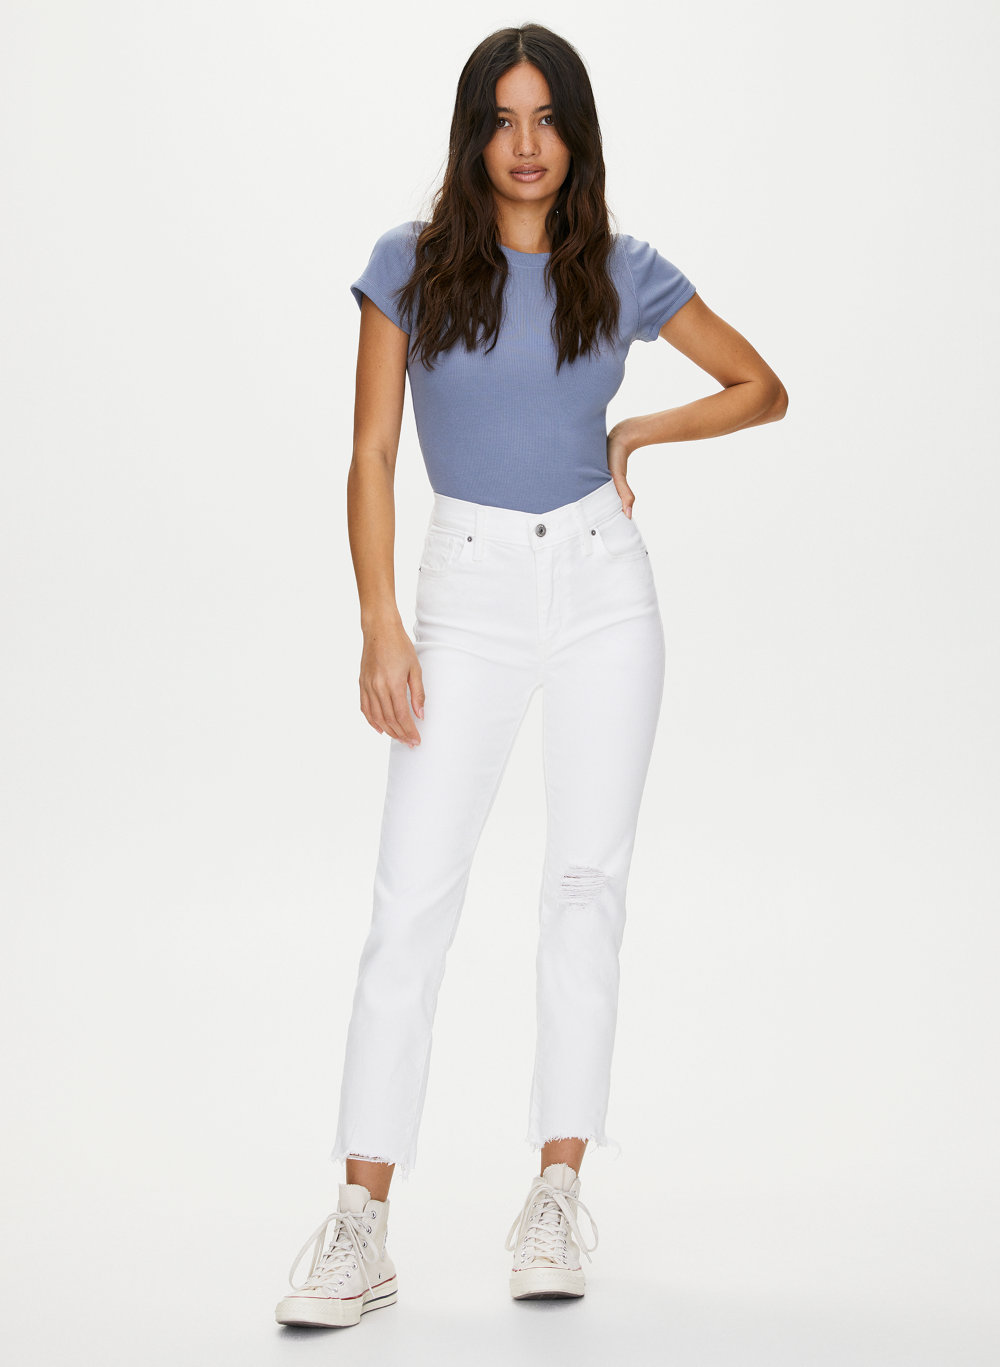 Levi's 724 White Jeans on Sale, SAVE 57% 